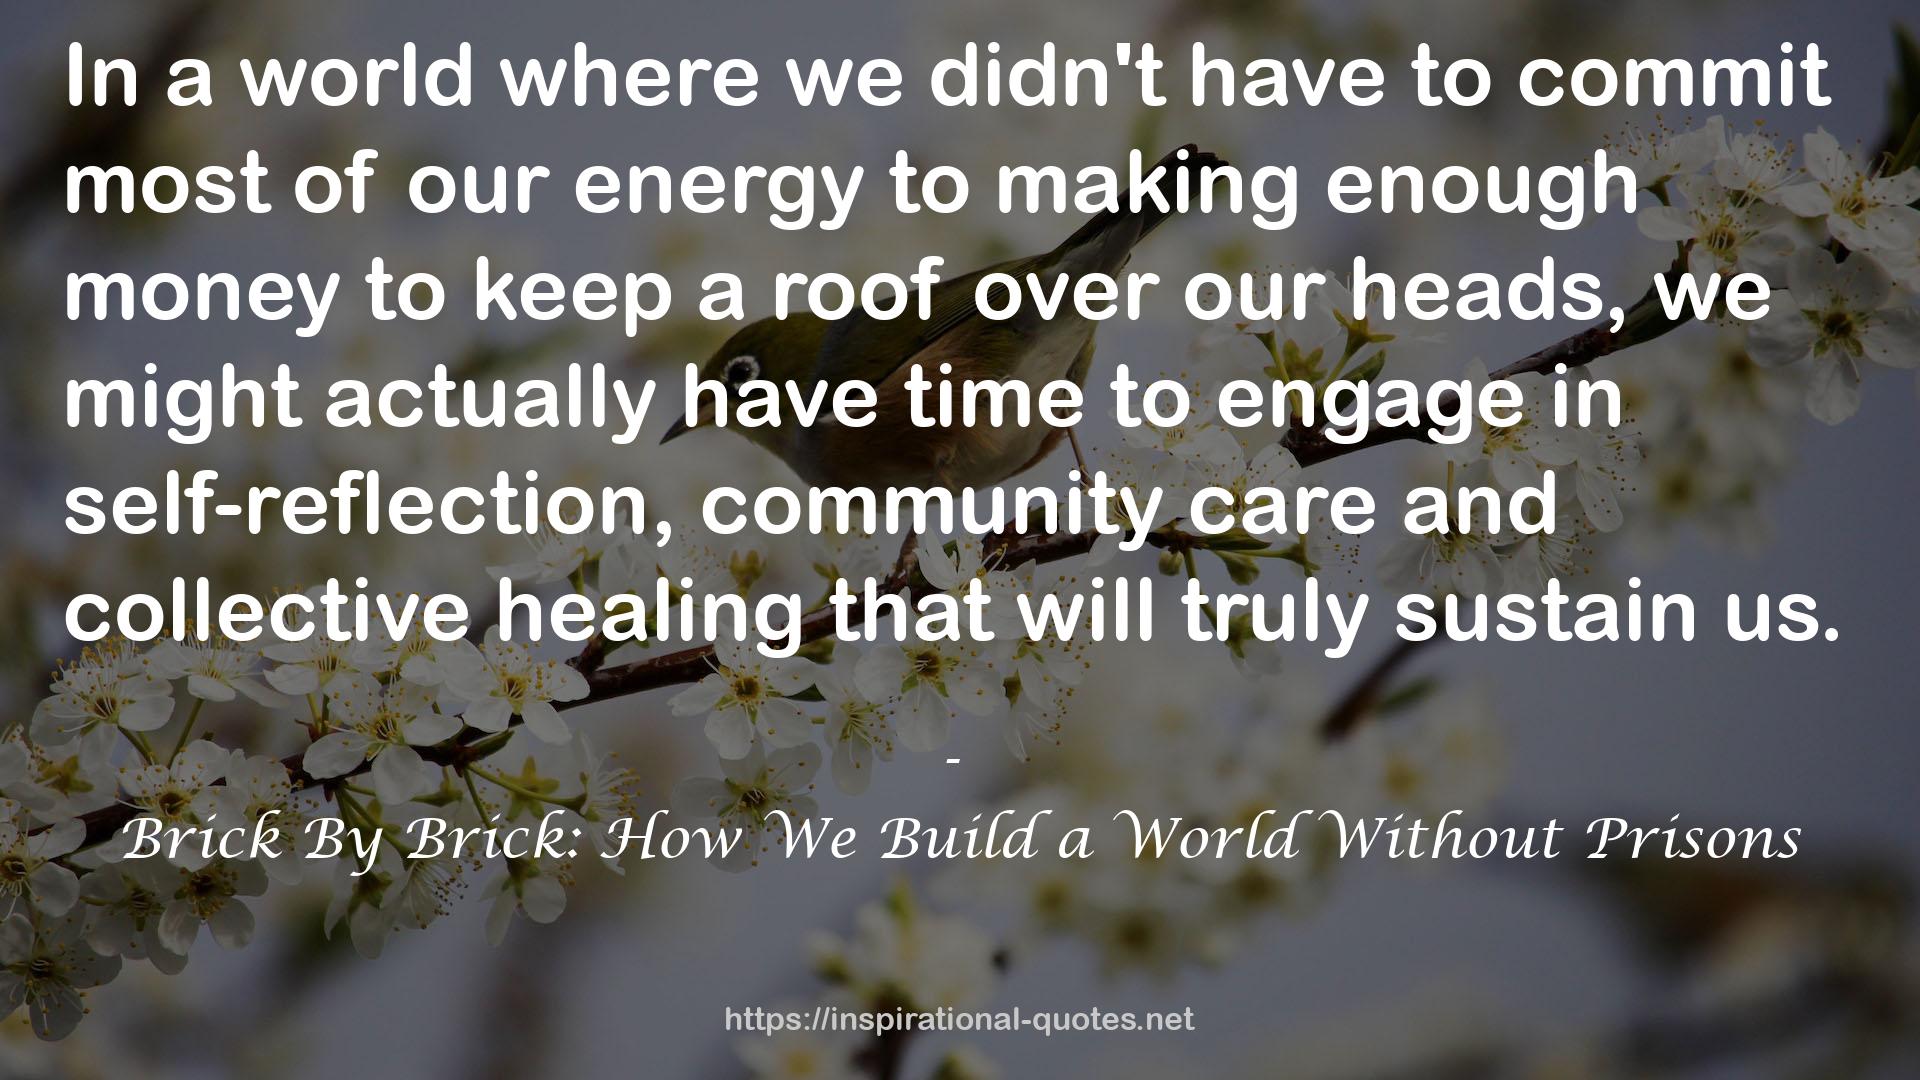 Brick By Brick: How We Build a World Without Prisons QUOTES